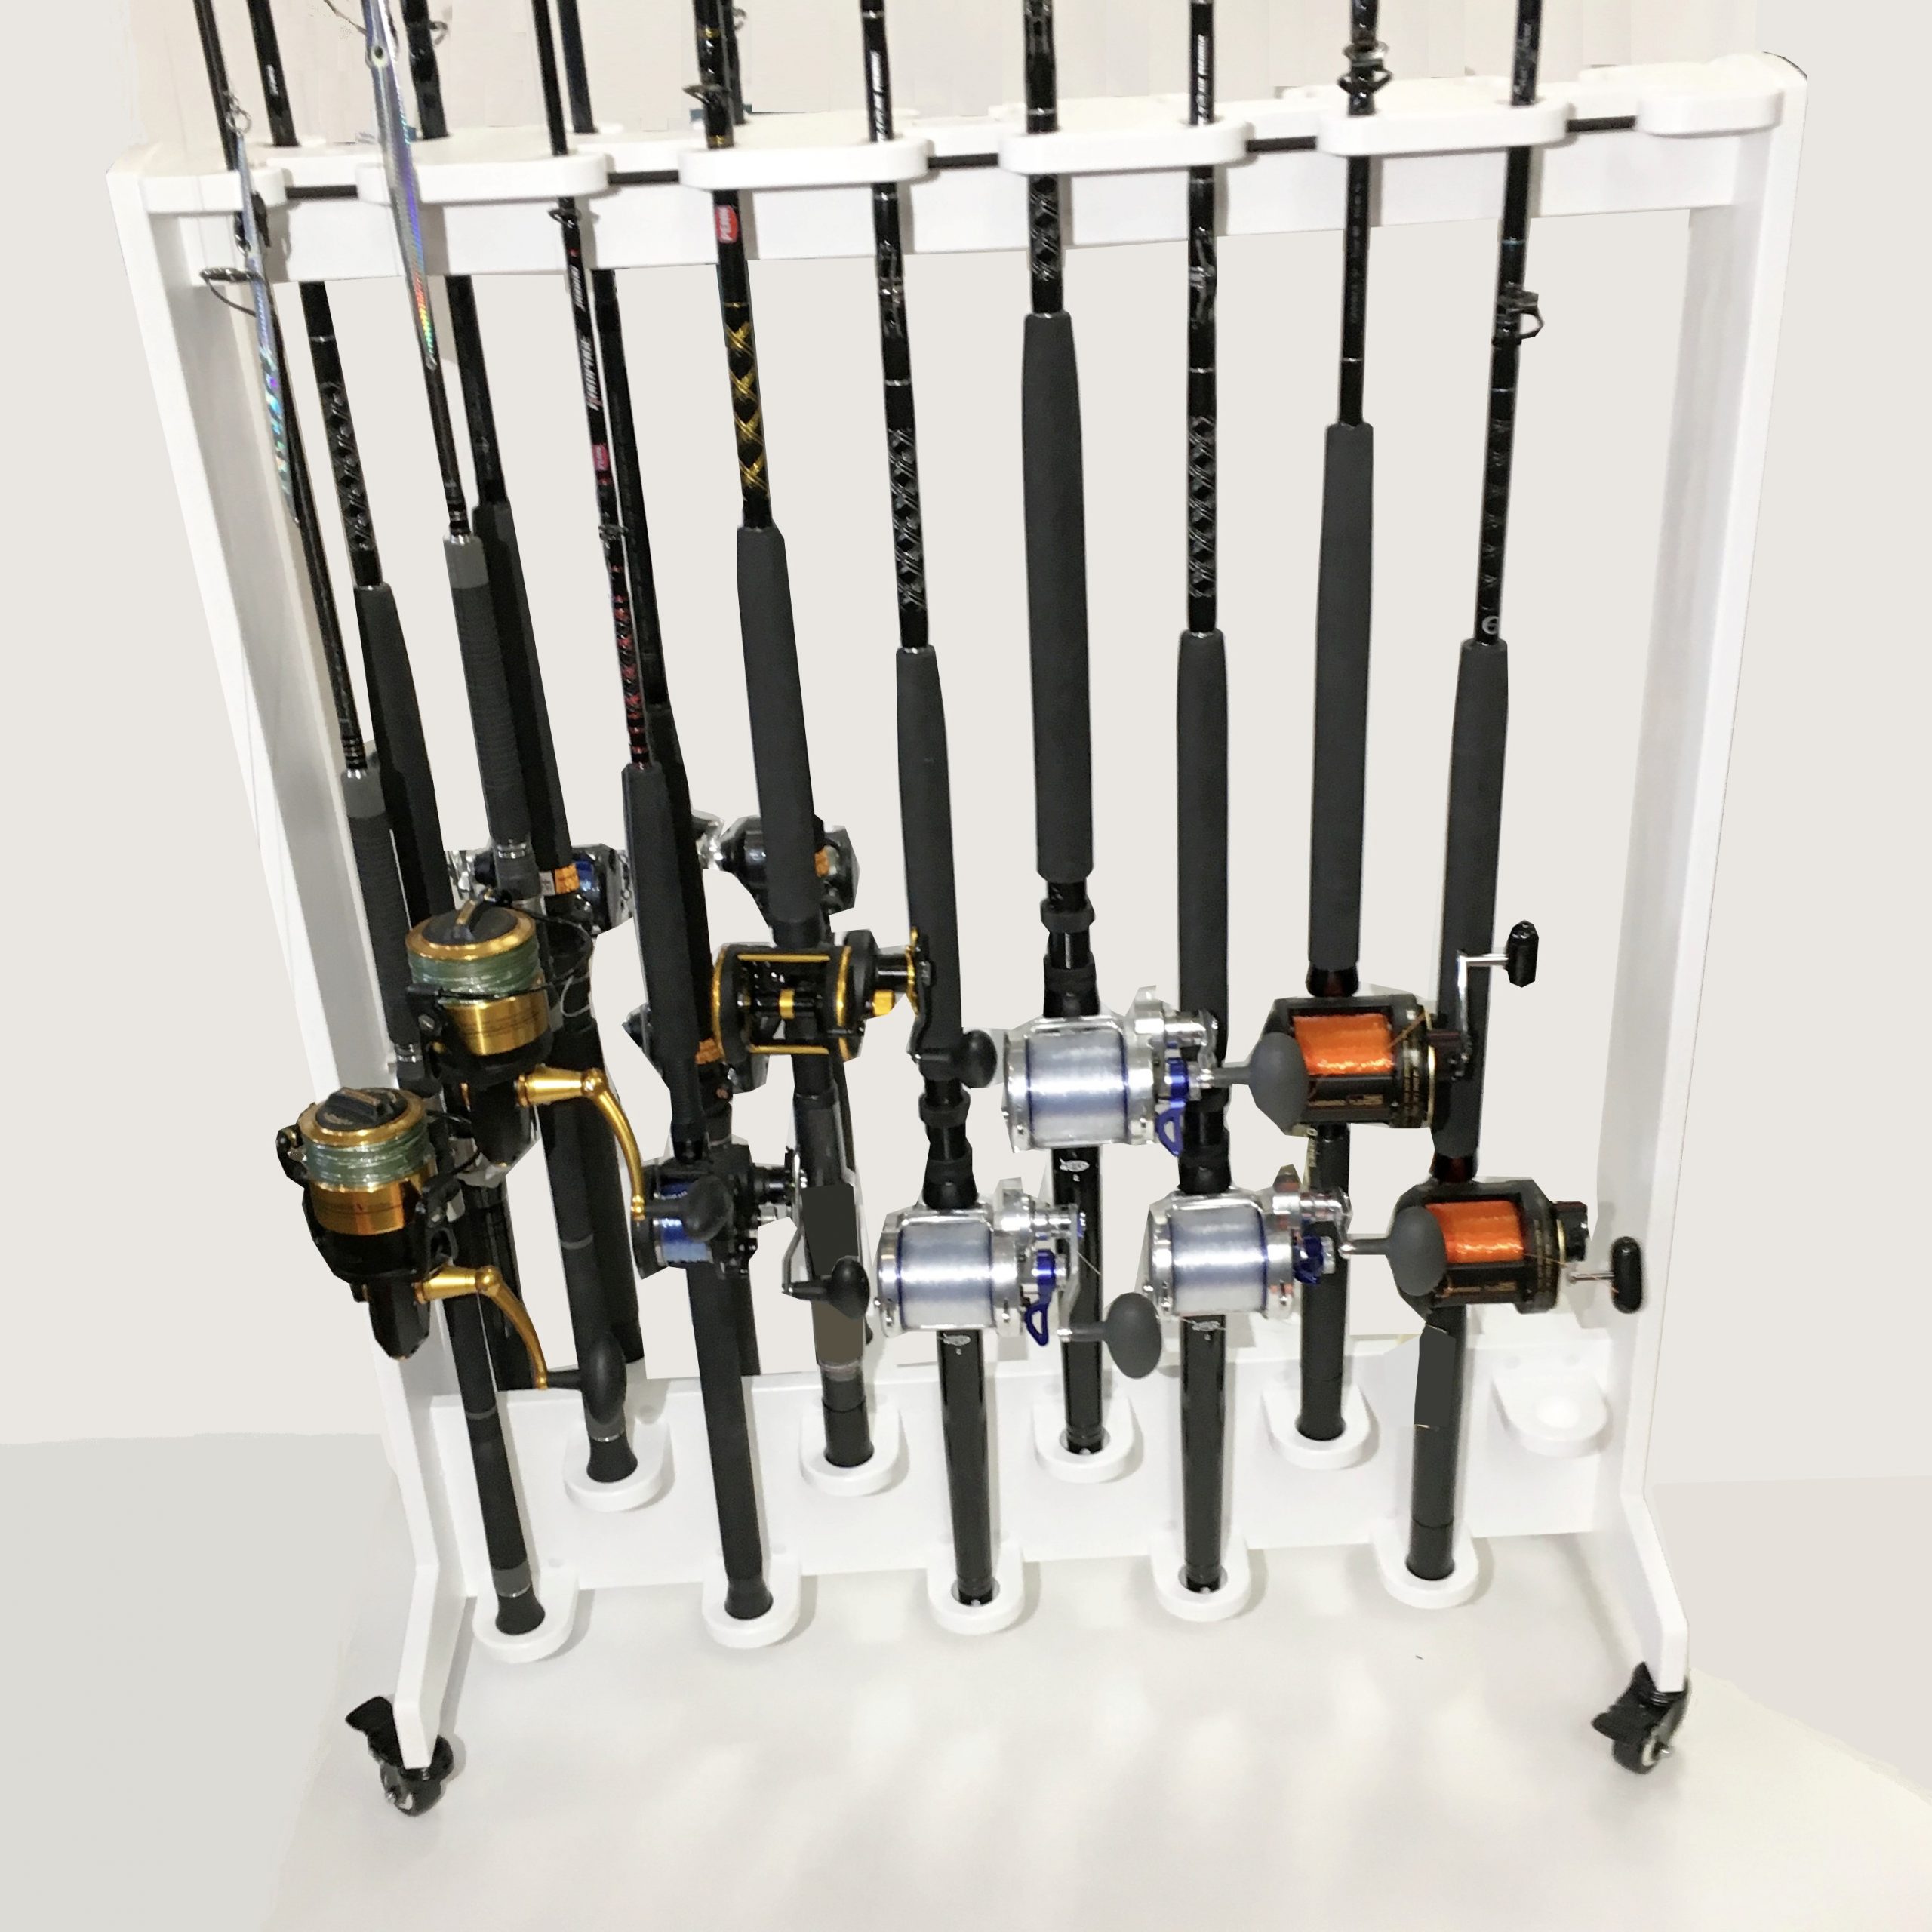 Rectangular 20 Rod Holder With Varied Heights